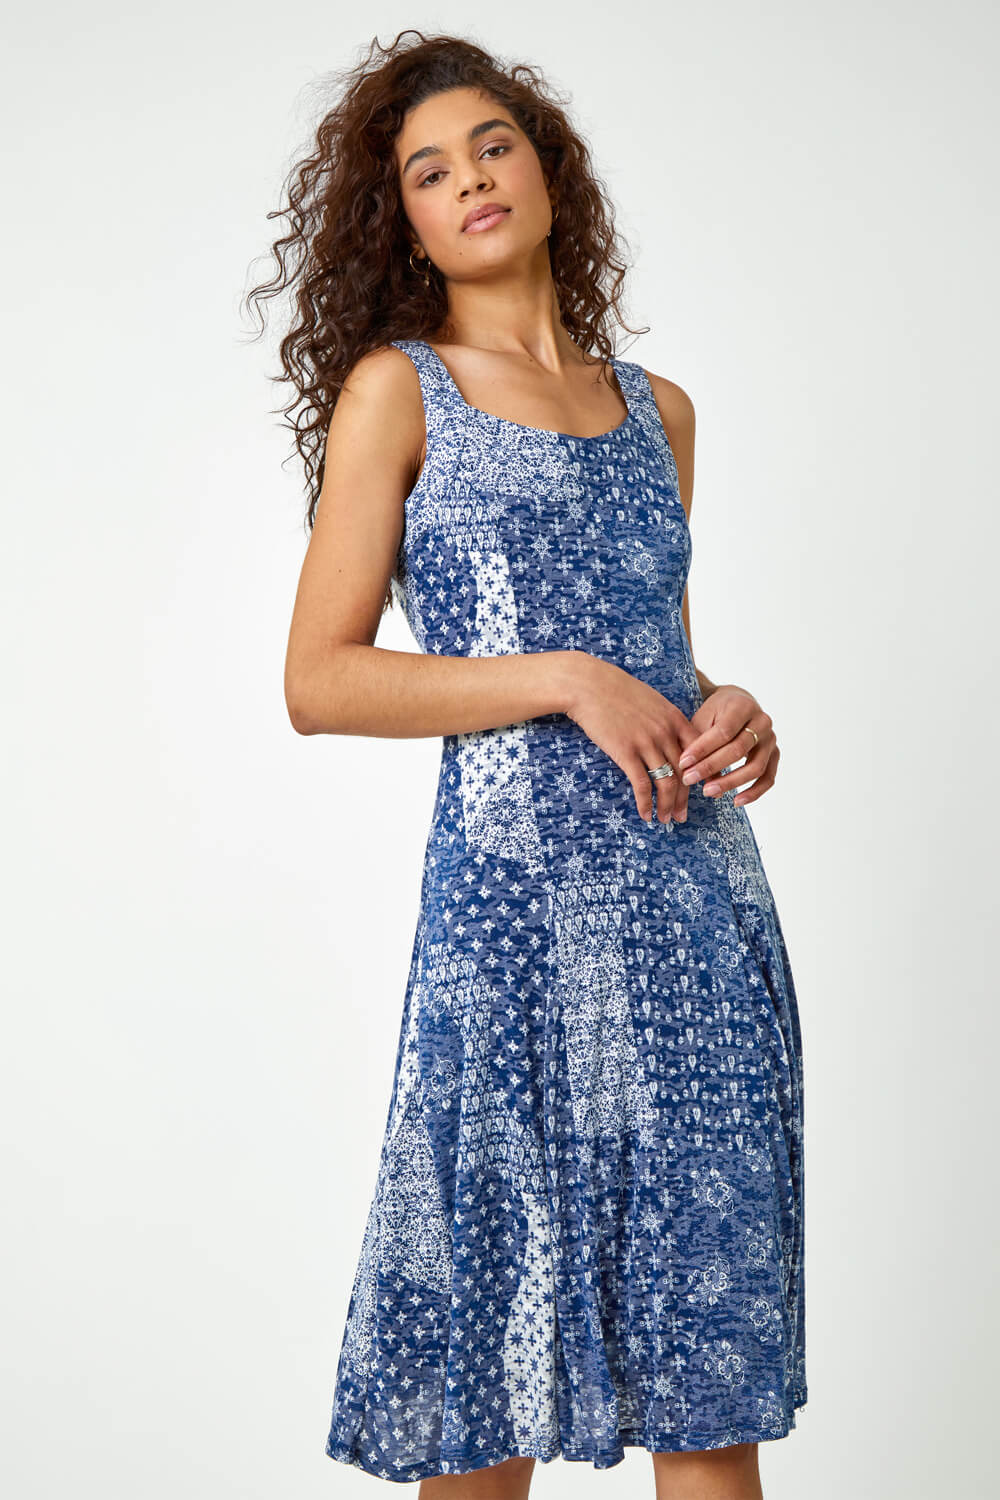 Blue Patchwork Print Fit and Flare Dress , Image 2 of 6